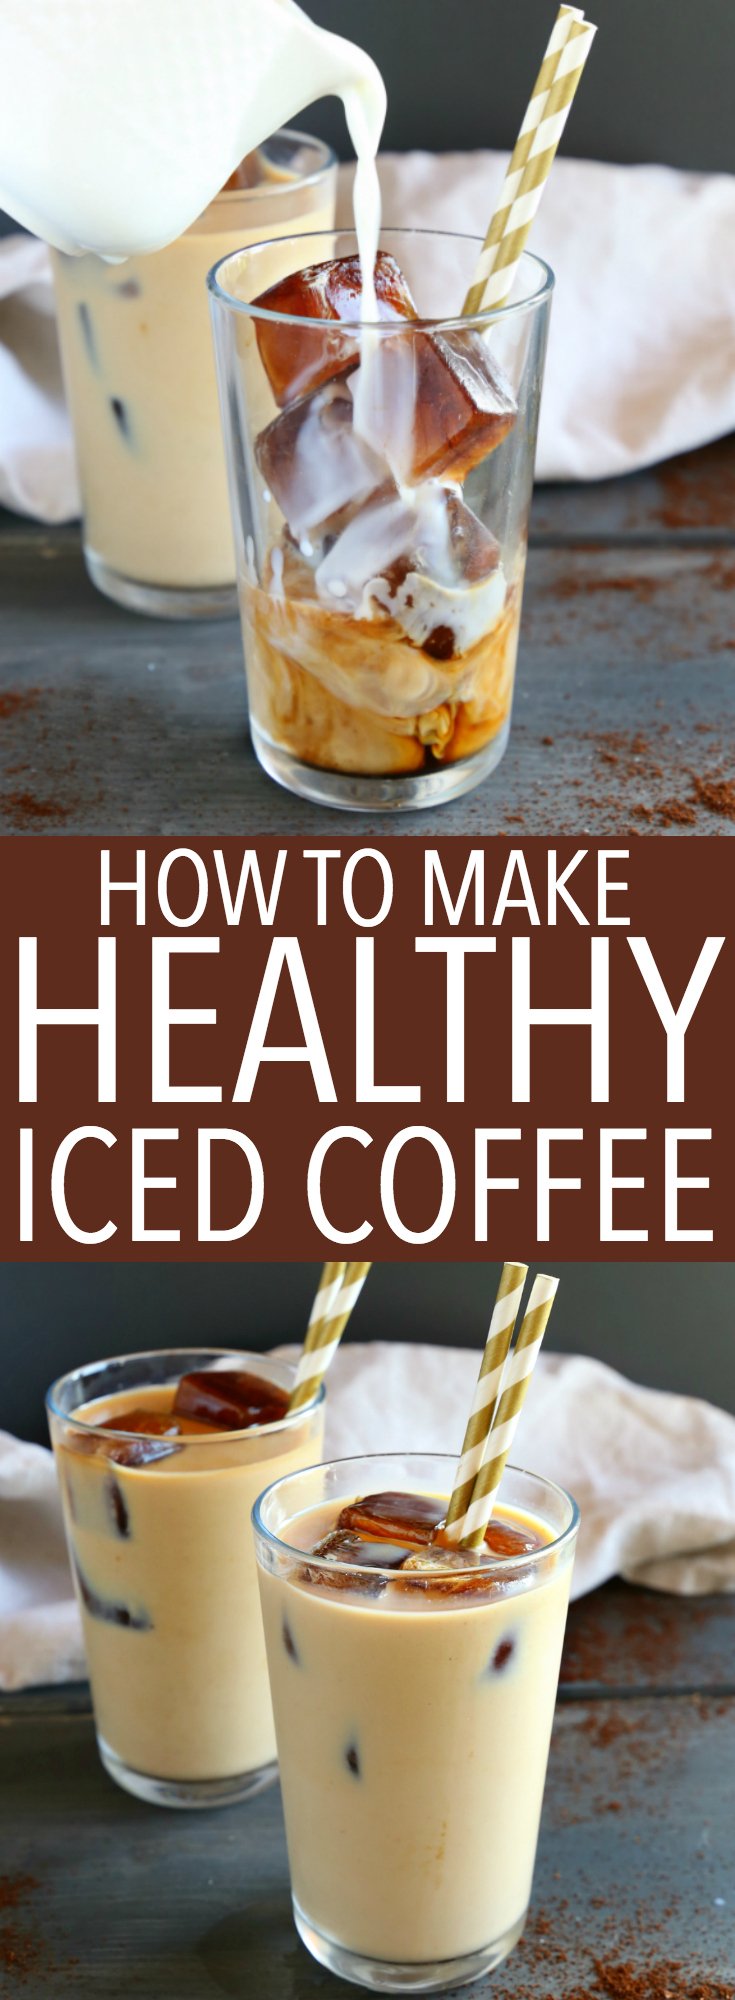 Learn how to make Healthy Iced Coffee at home that's healthy, diet-friendly, and costs only pennies per cup! Skip the coffee shop to save calories and money! Recipe from thebusybaker.ca! #healthyicedcoffee #starbuckscopycat #dairyfreeicedcoffee via @busybakerblog